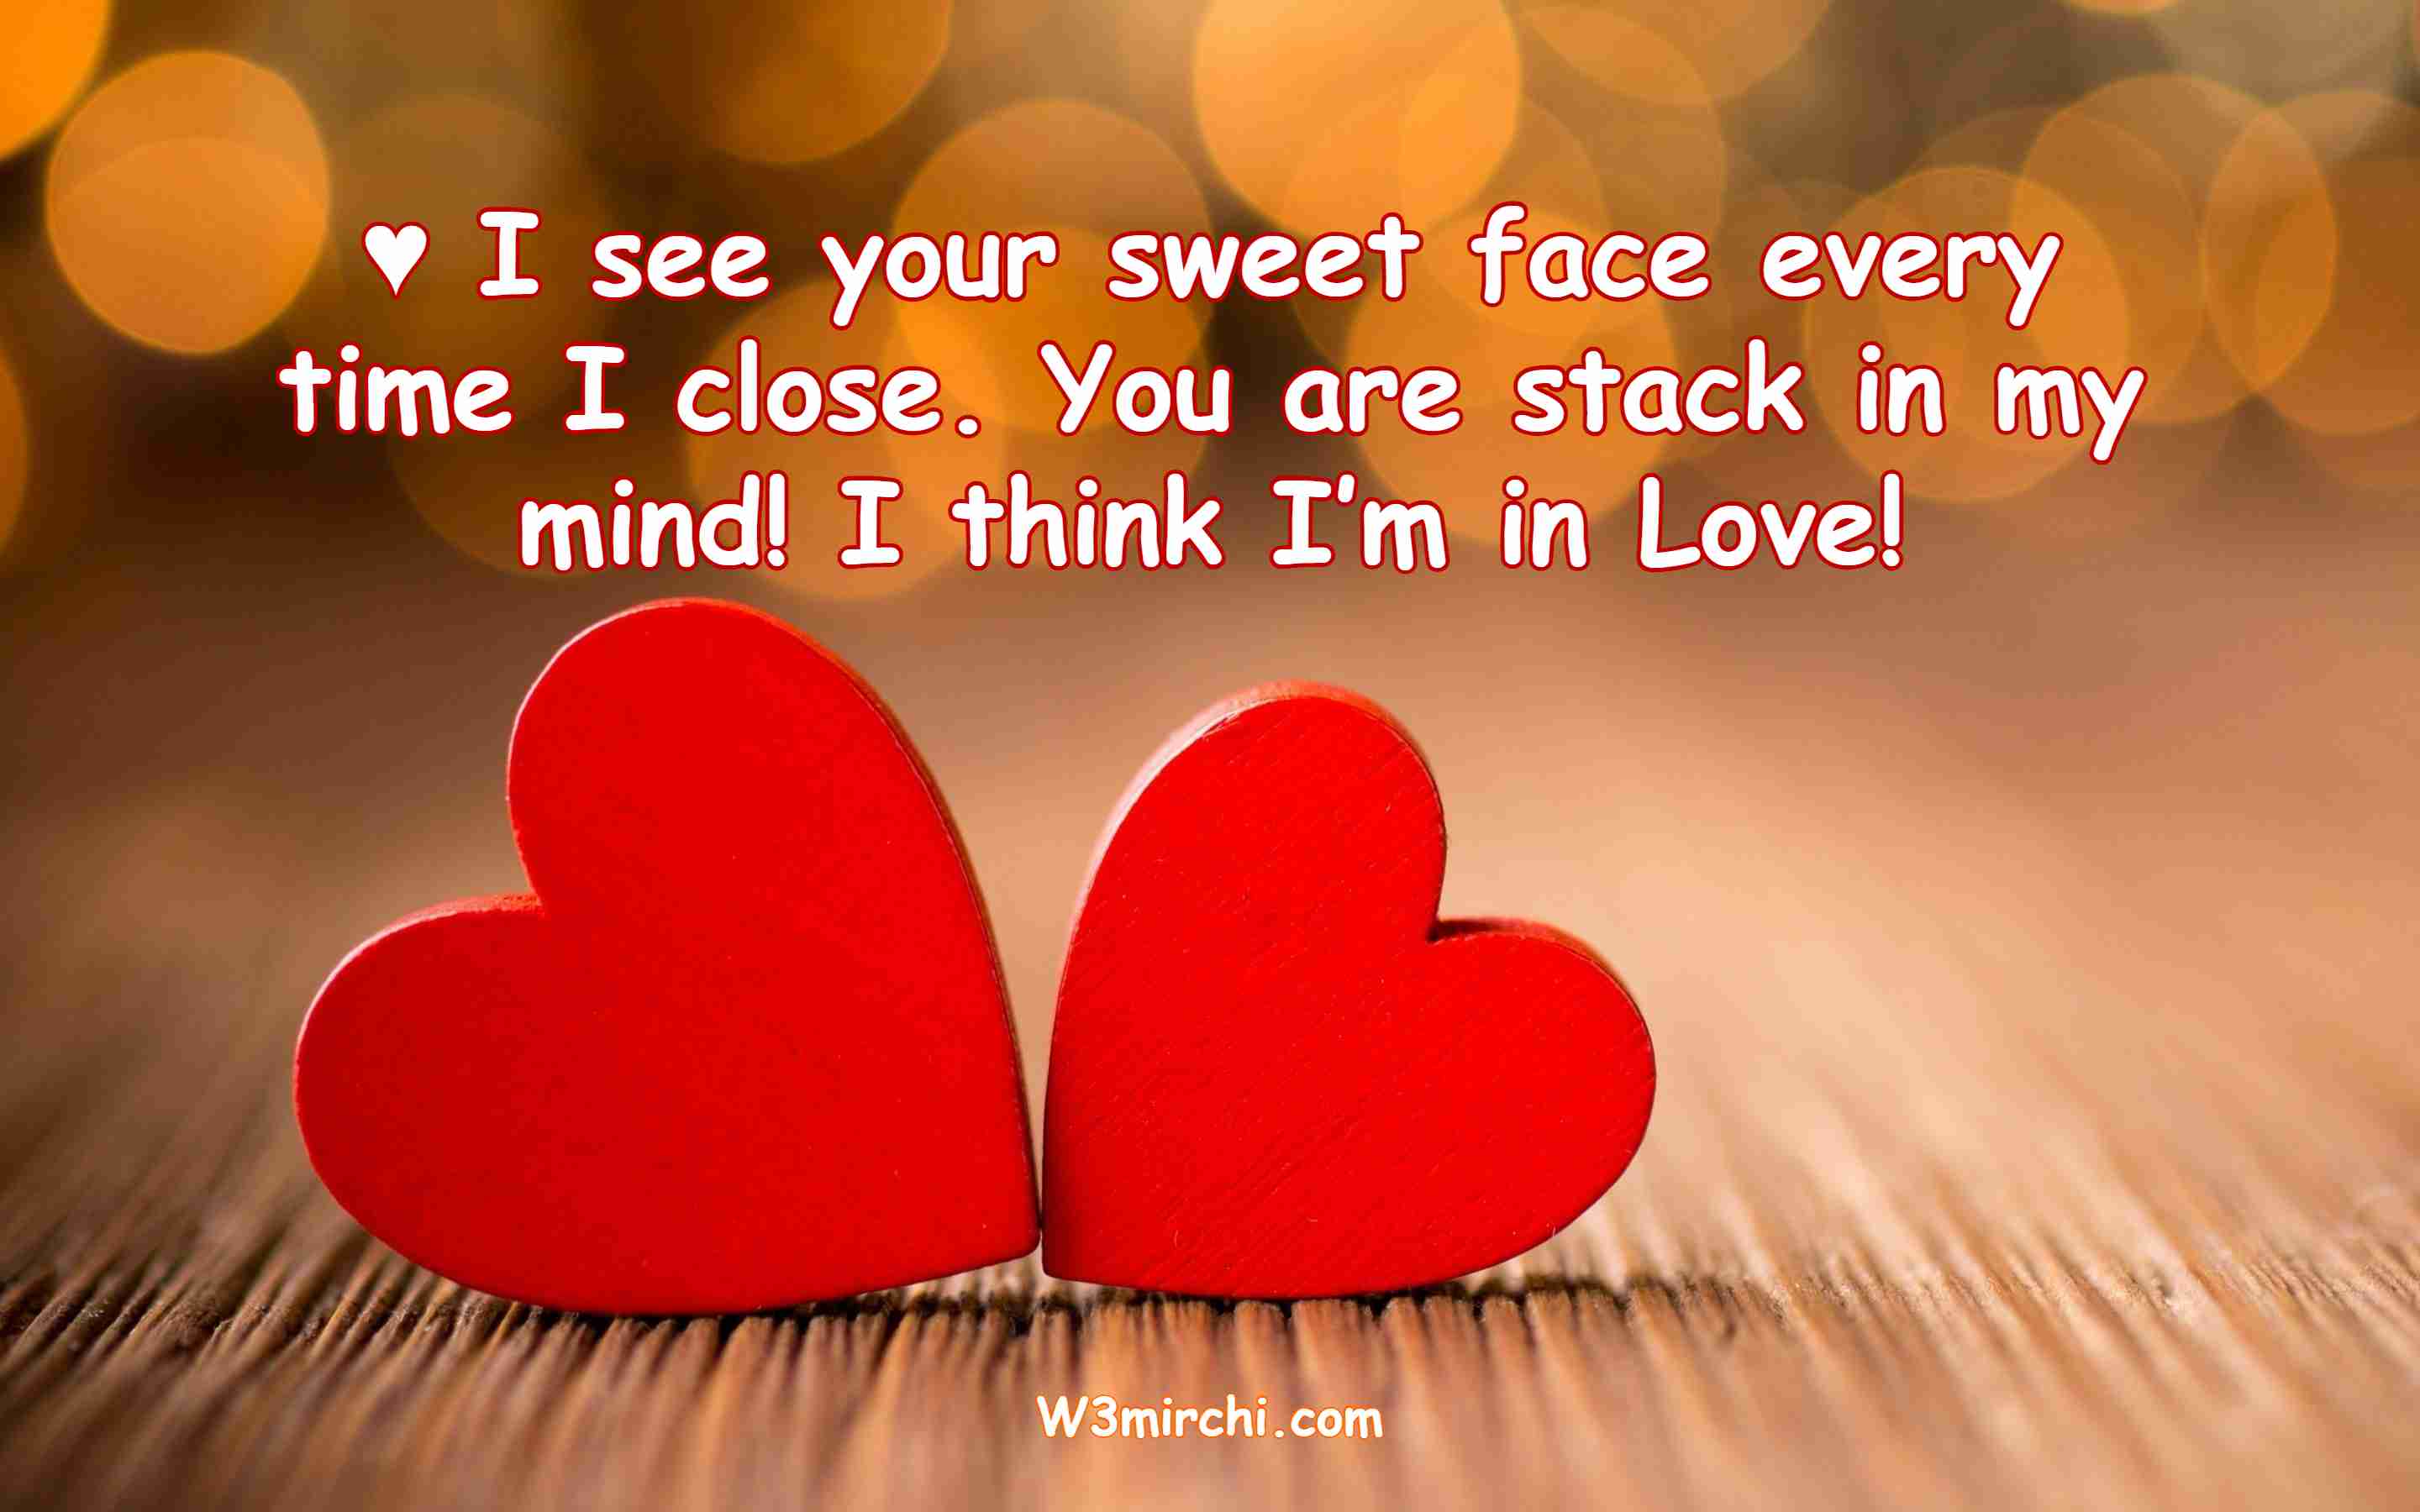 ♥ I see your sweet face every time I close.